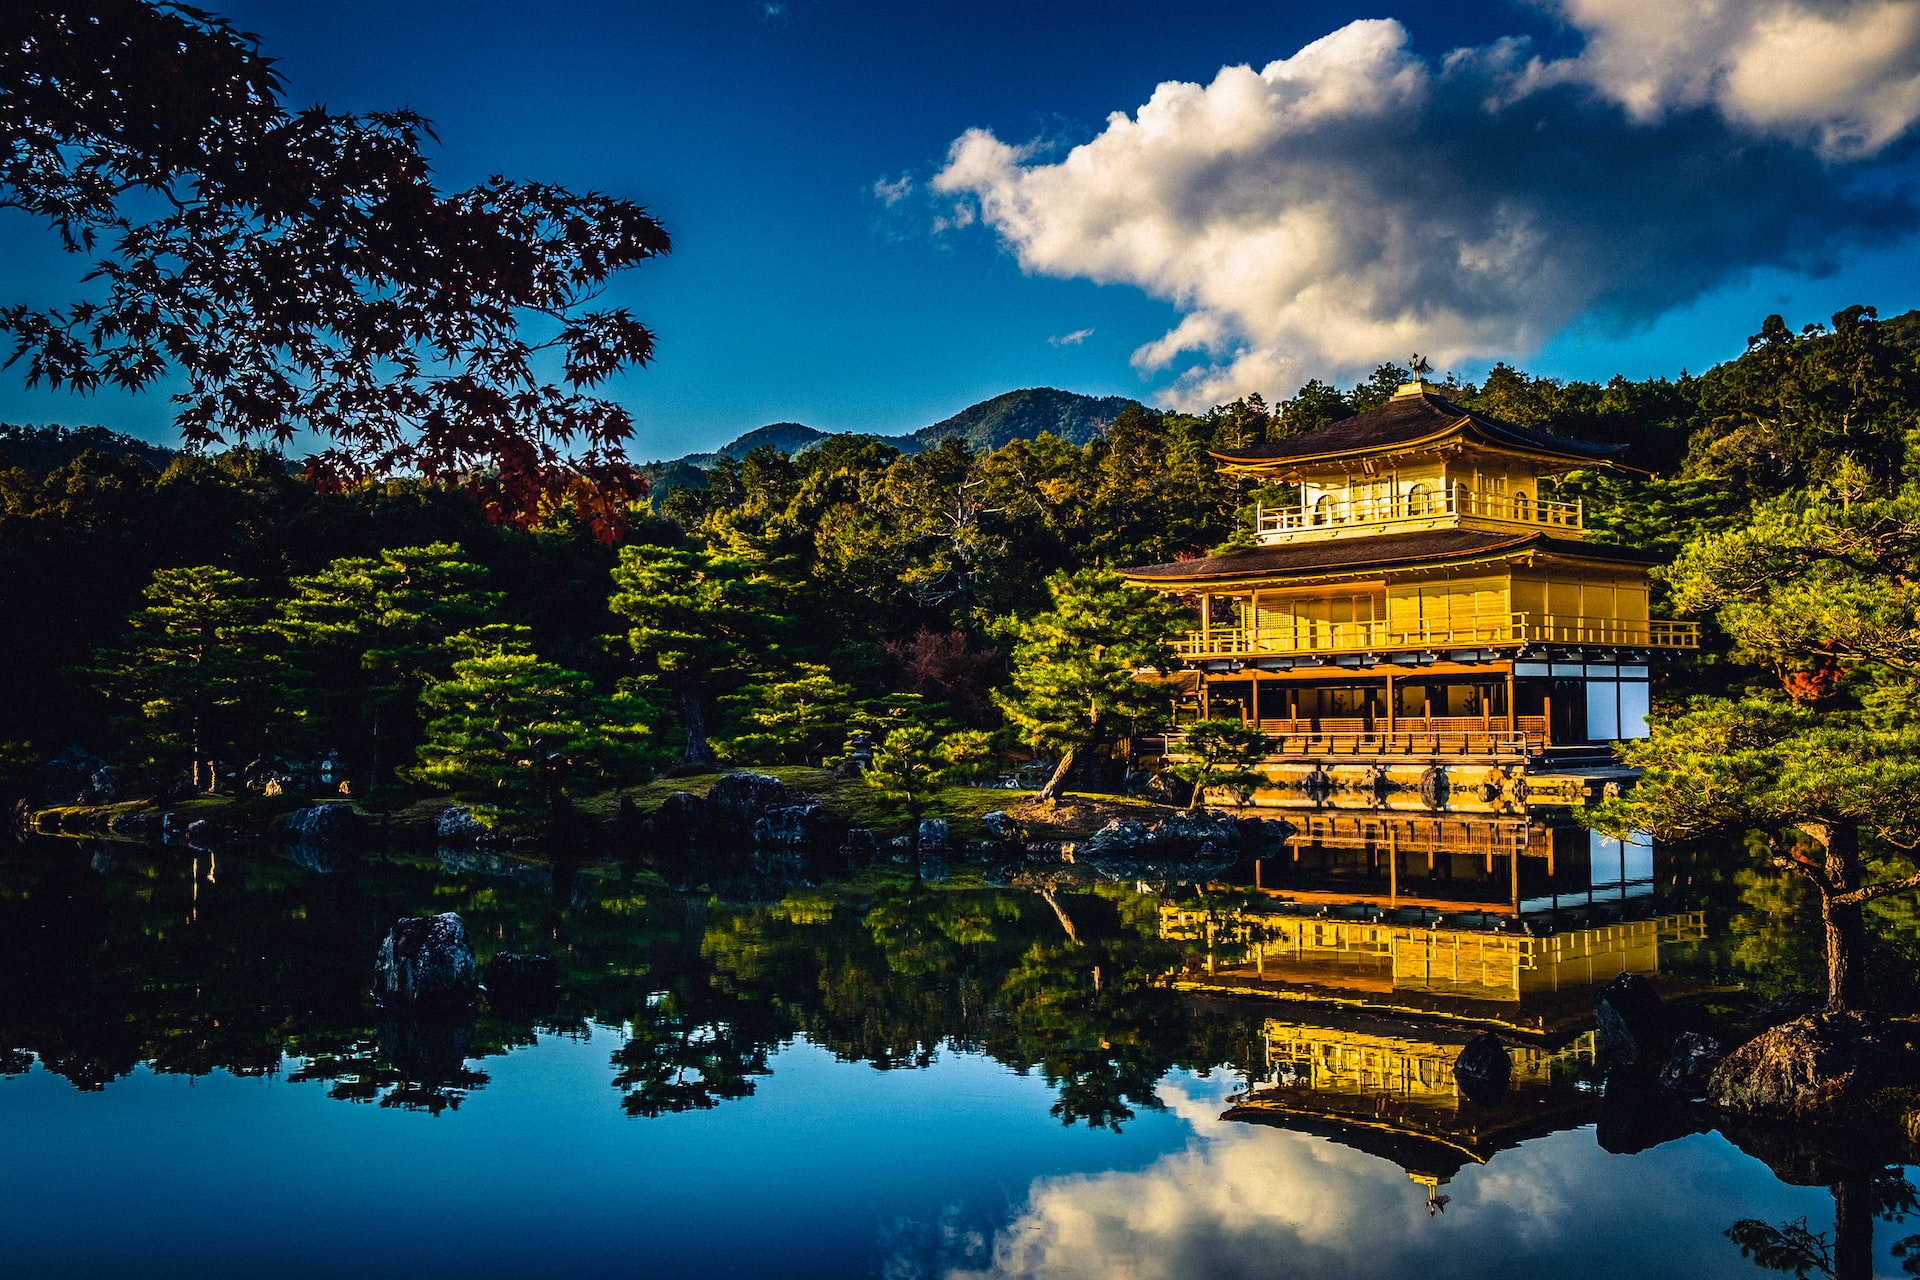 places to visit in japan Kyoto

